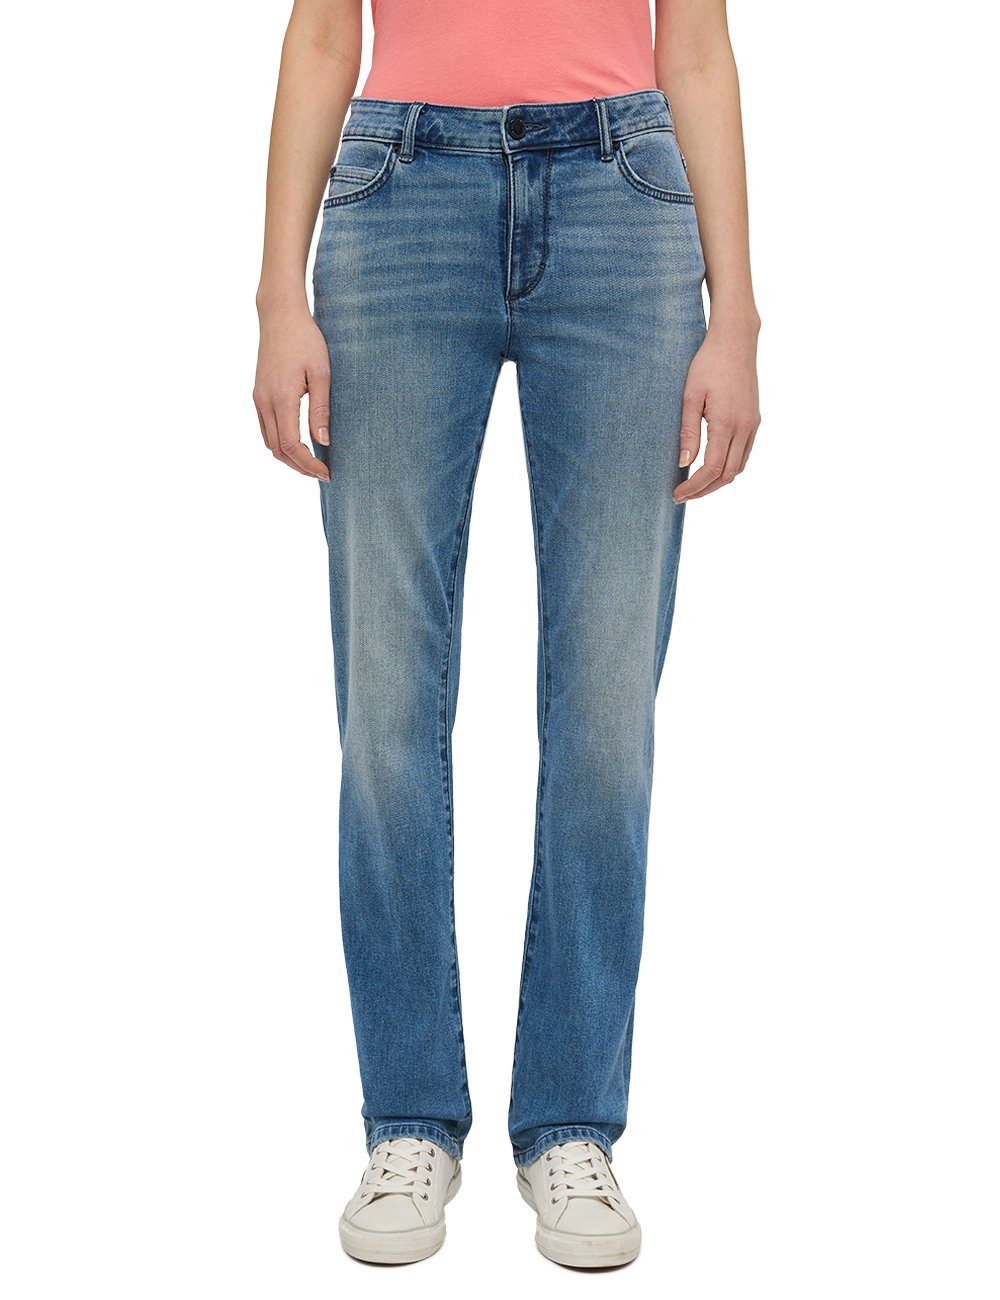 Straight Style Crosby mittelblau-5000412 Straight-Jeans MUSTANG Relaxed